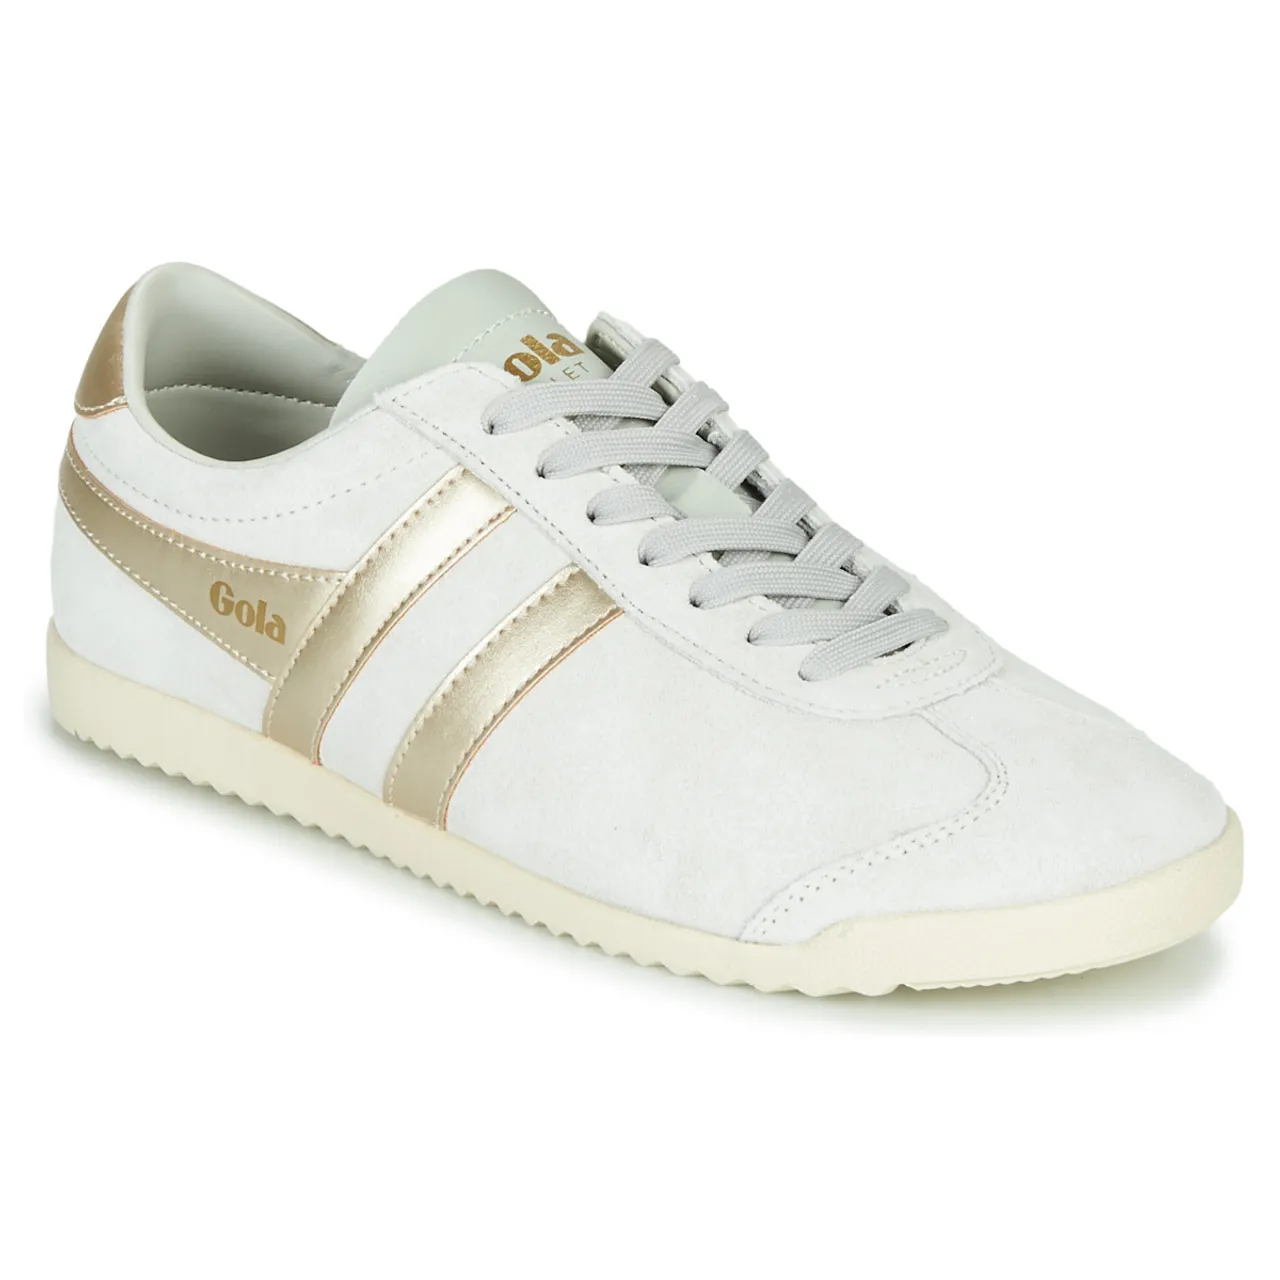 Gola  BULLET PEARL  women's Shoes (Trainers) in White